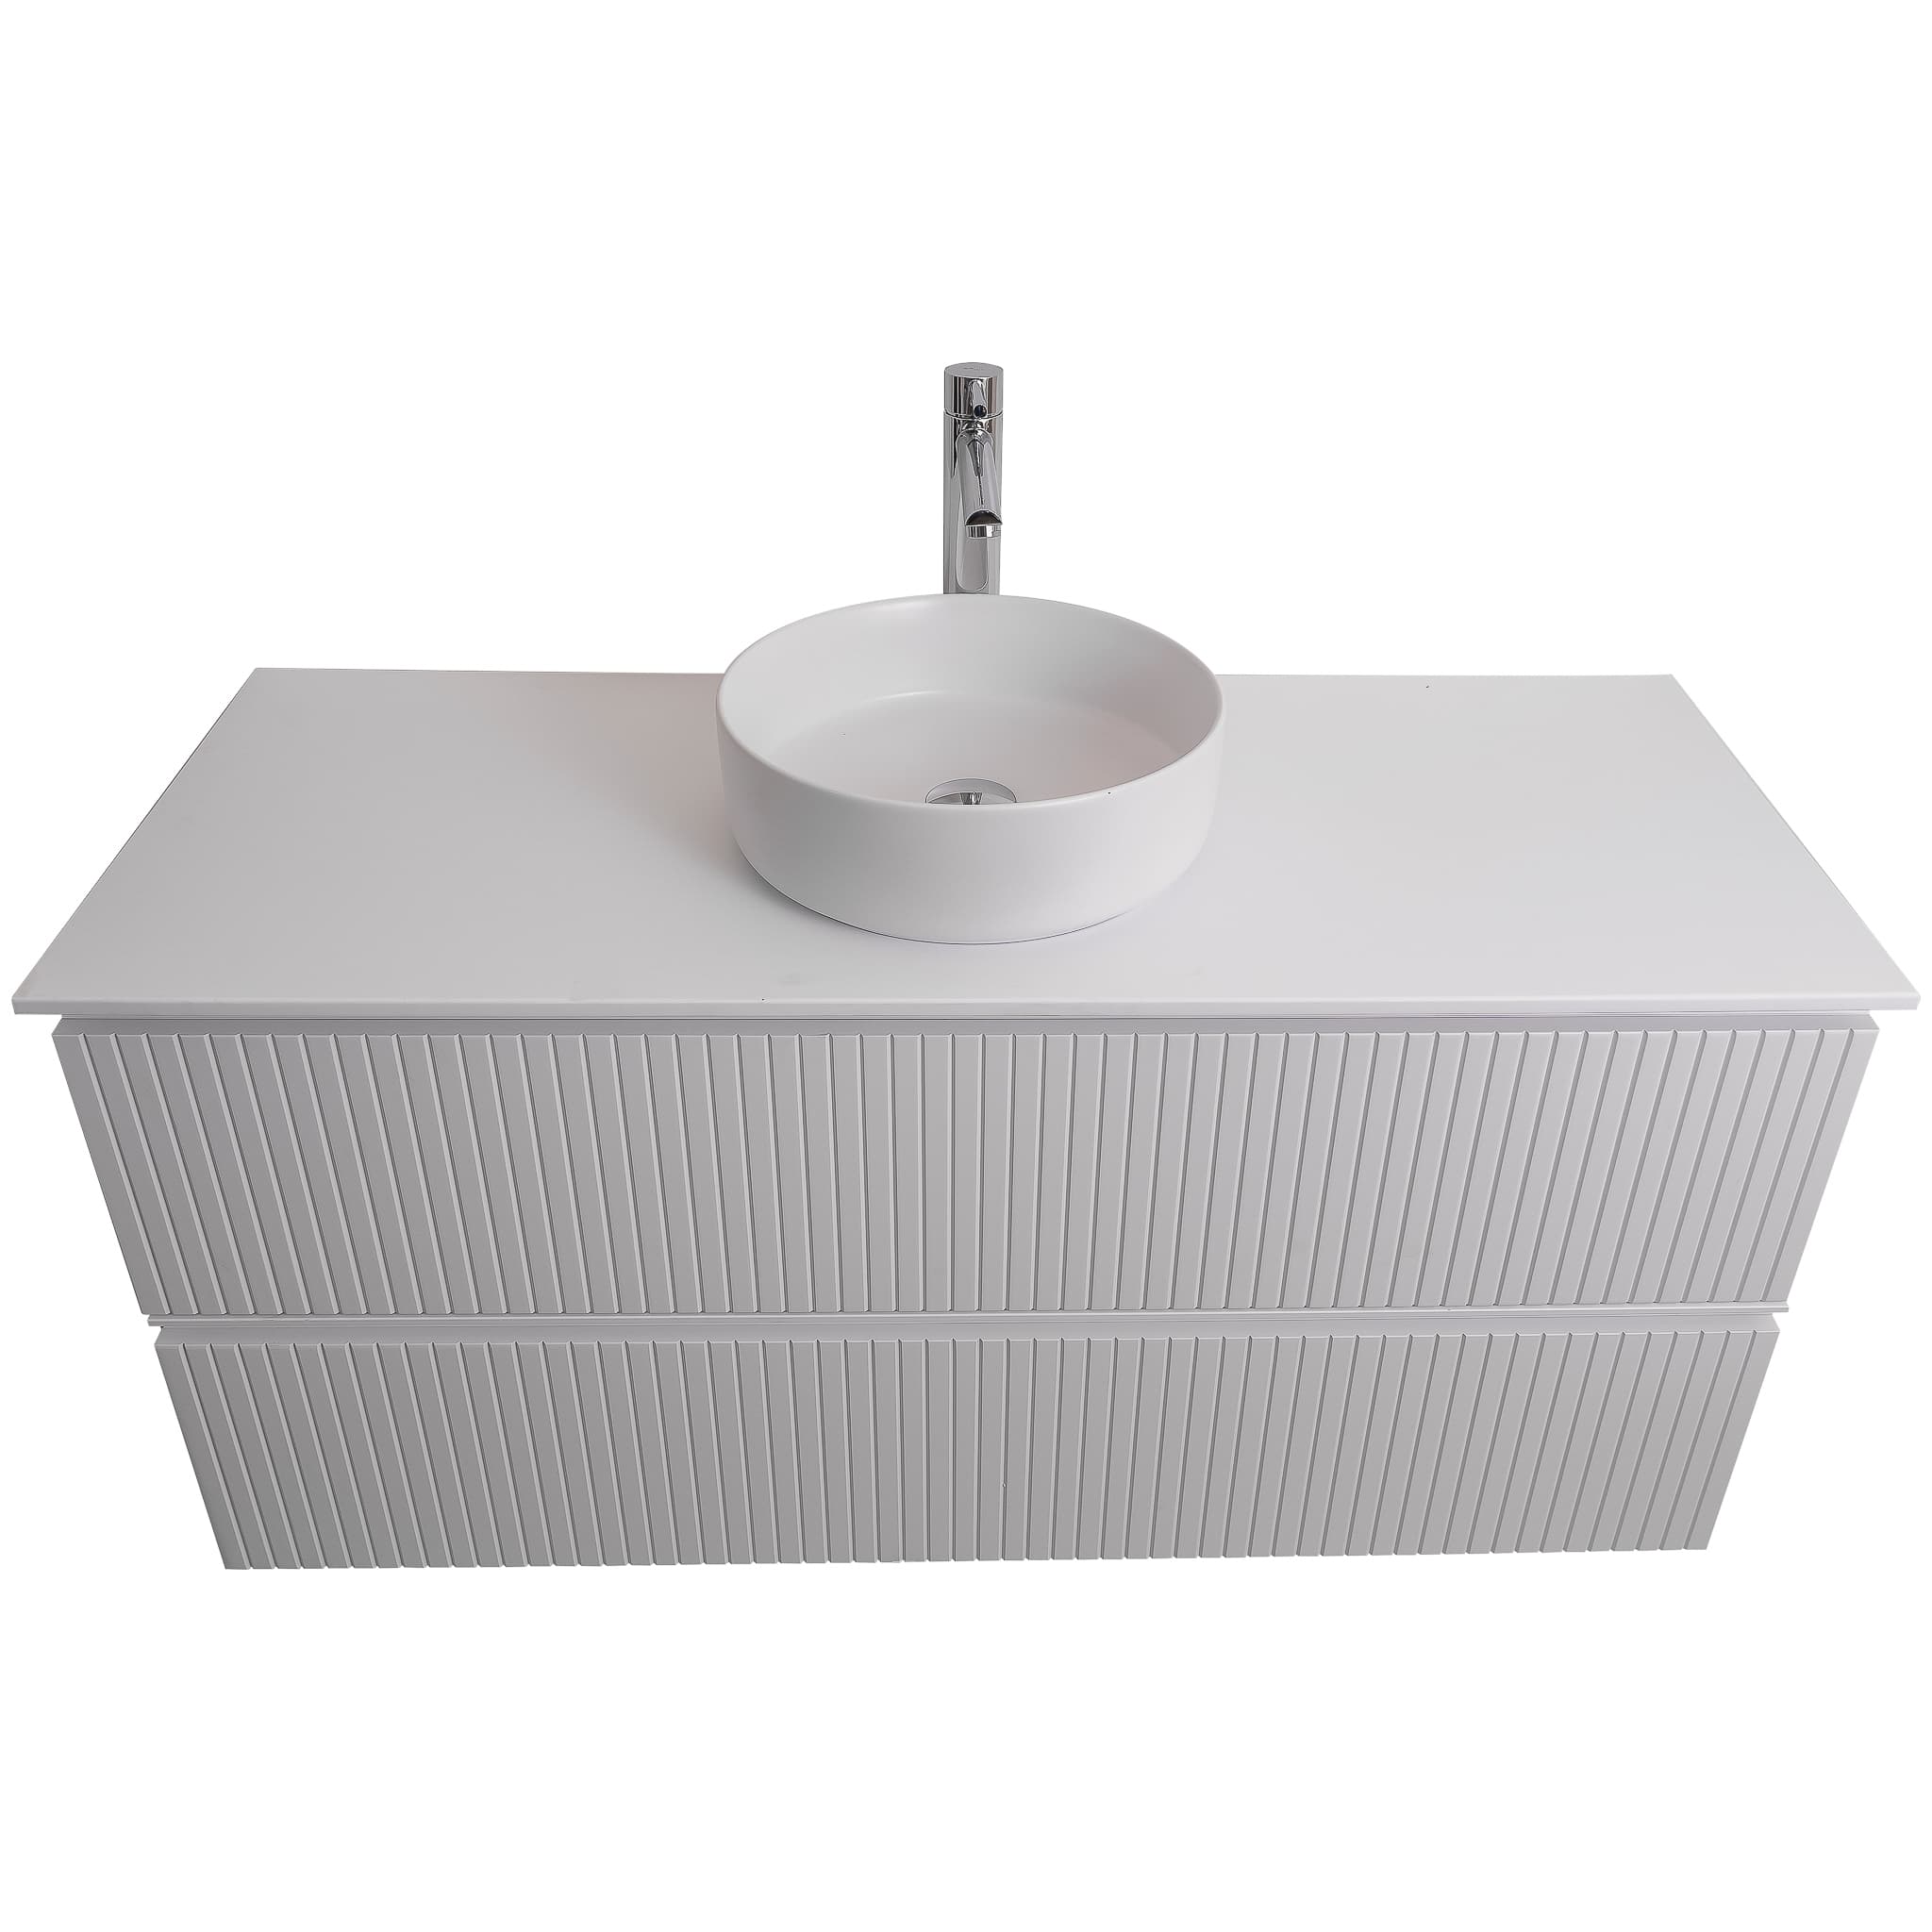 Ares 47.5 Matte White Cabinet, Ares White Top And Ares White Ceramic Basin, Wall Mounted Modern Vanity Set